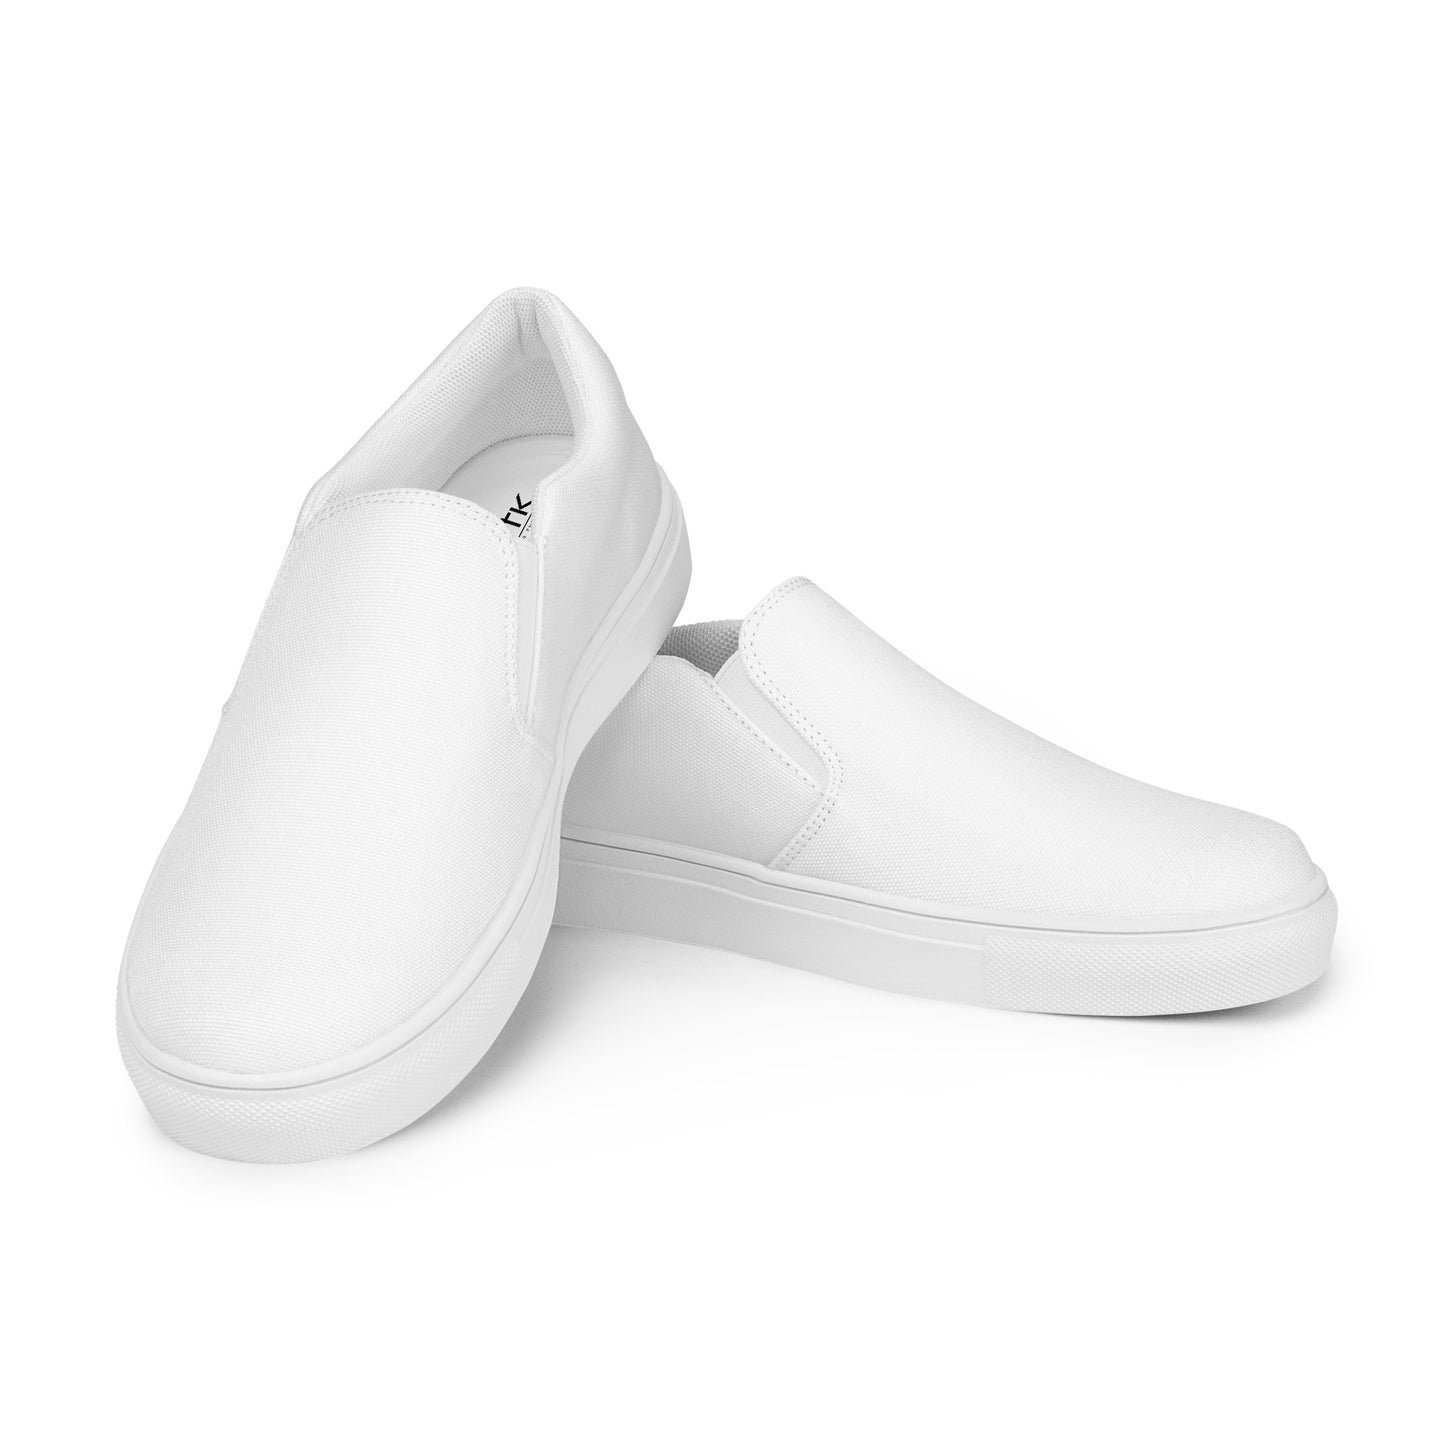 DFTK Women’s slip-on canvas shoes - DRESS FOR THE KING